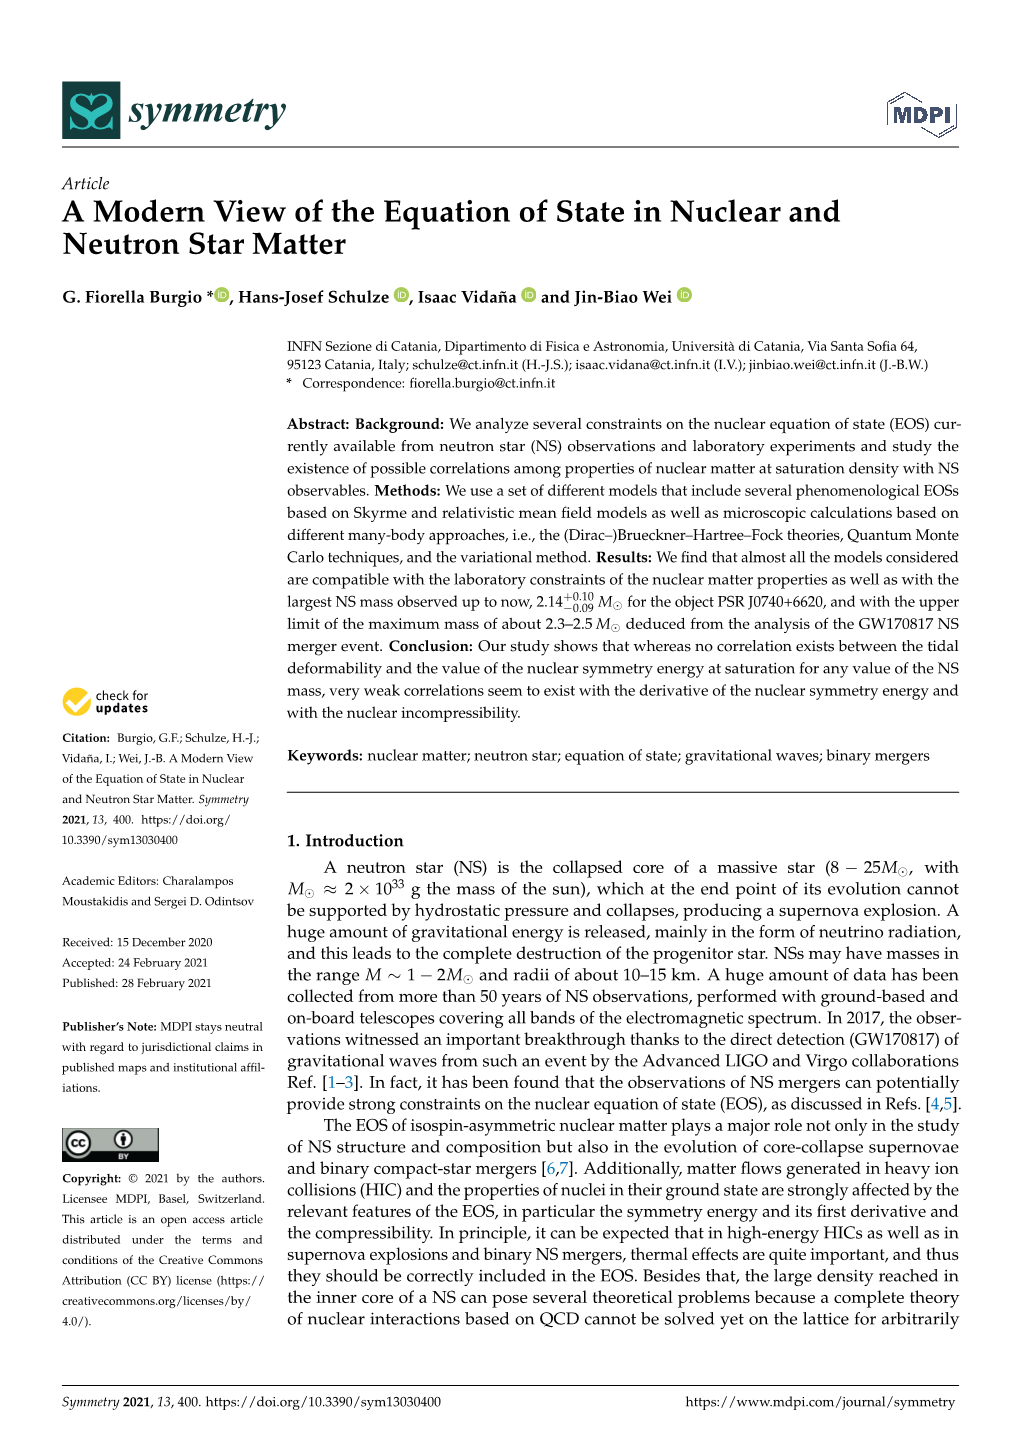 A Modern View of the Equation of State in Nuclear and Neutron Star Matter